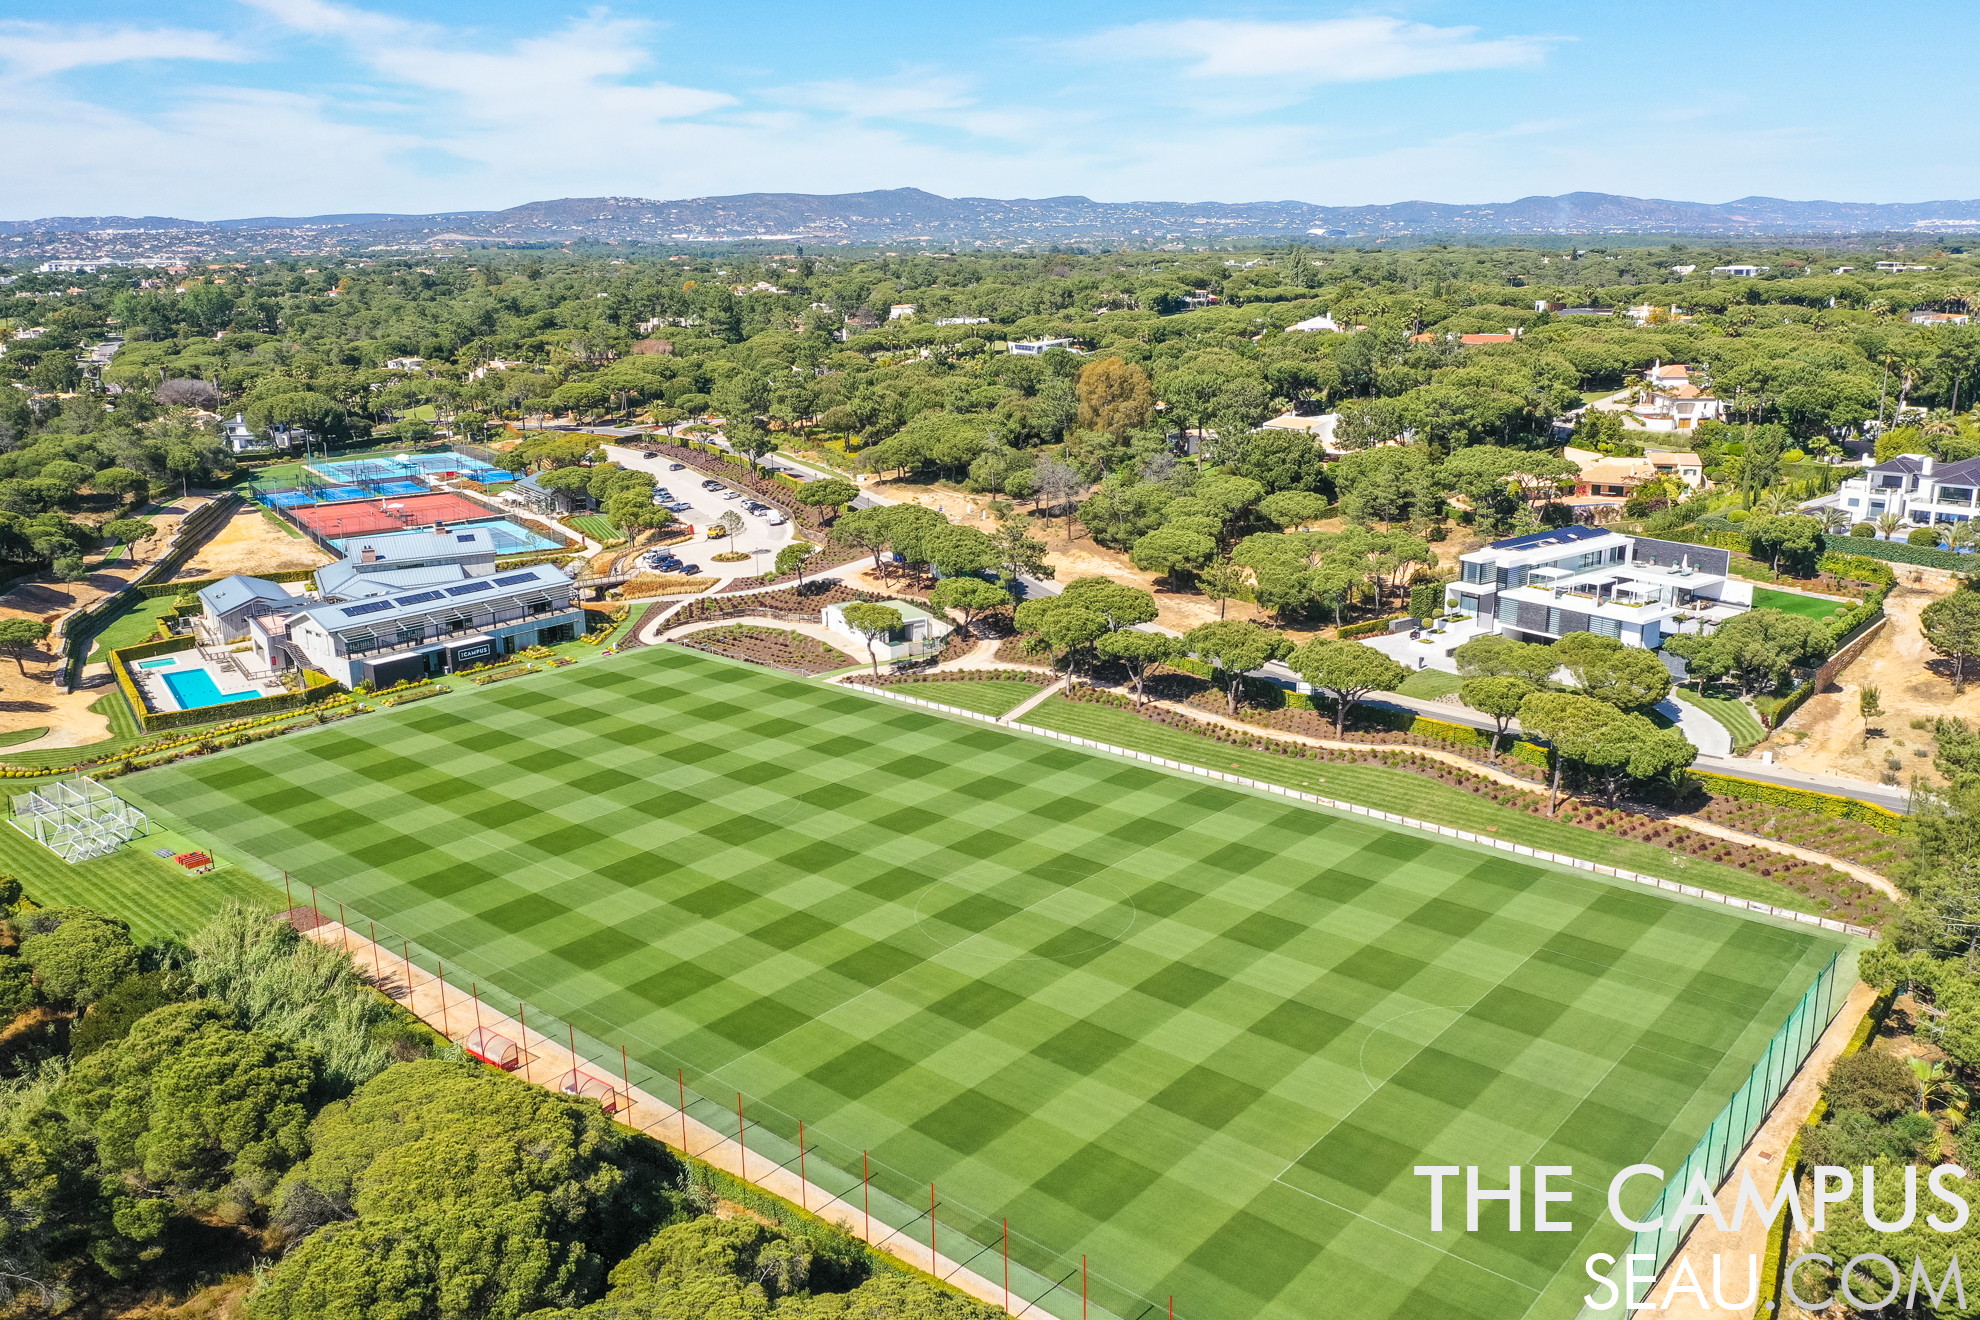 The "The Campus" Quinta do Lago gym is a high performance training center for professional and amateur athletes. With high-end sports infrastructures, The Campus is equipped with a football pitch, which can be adapted for other sports, tennis courts, paddle courts, swimming pools, gym with functional machines, training rooms for groups, and other services .